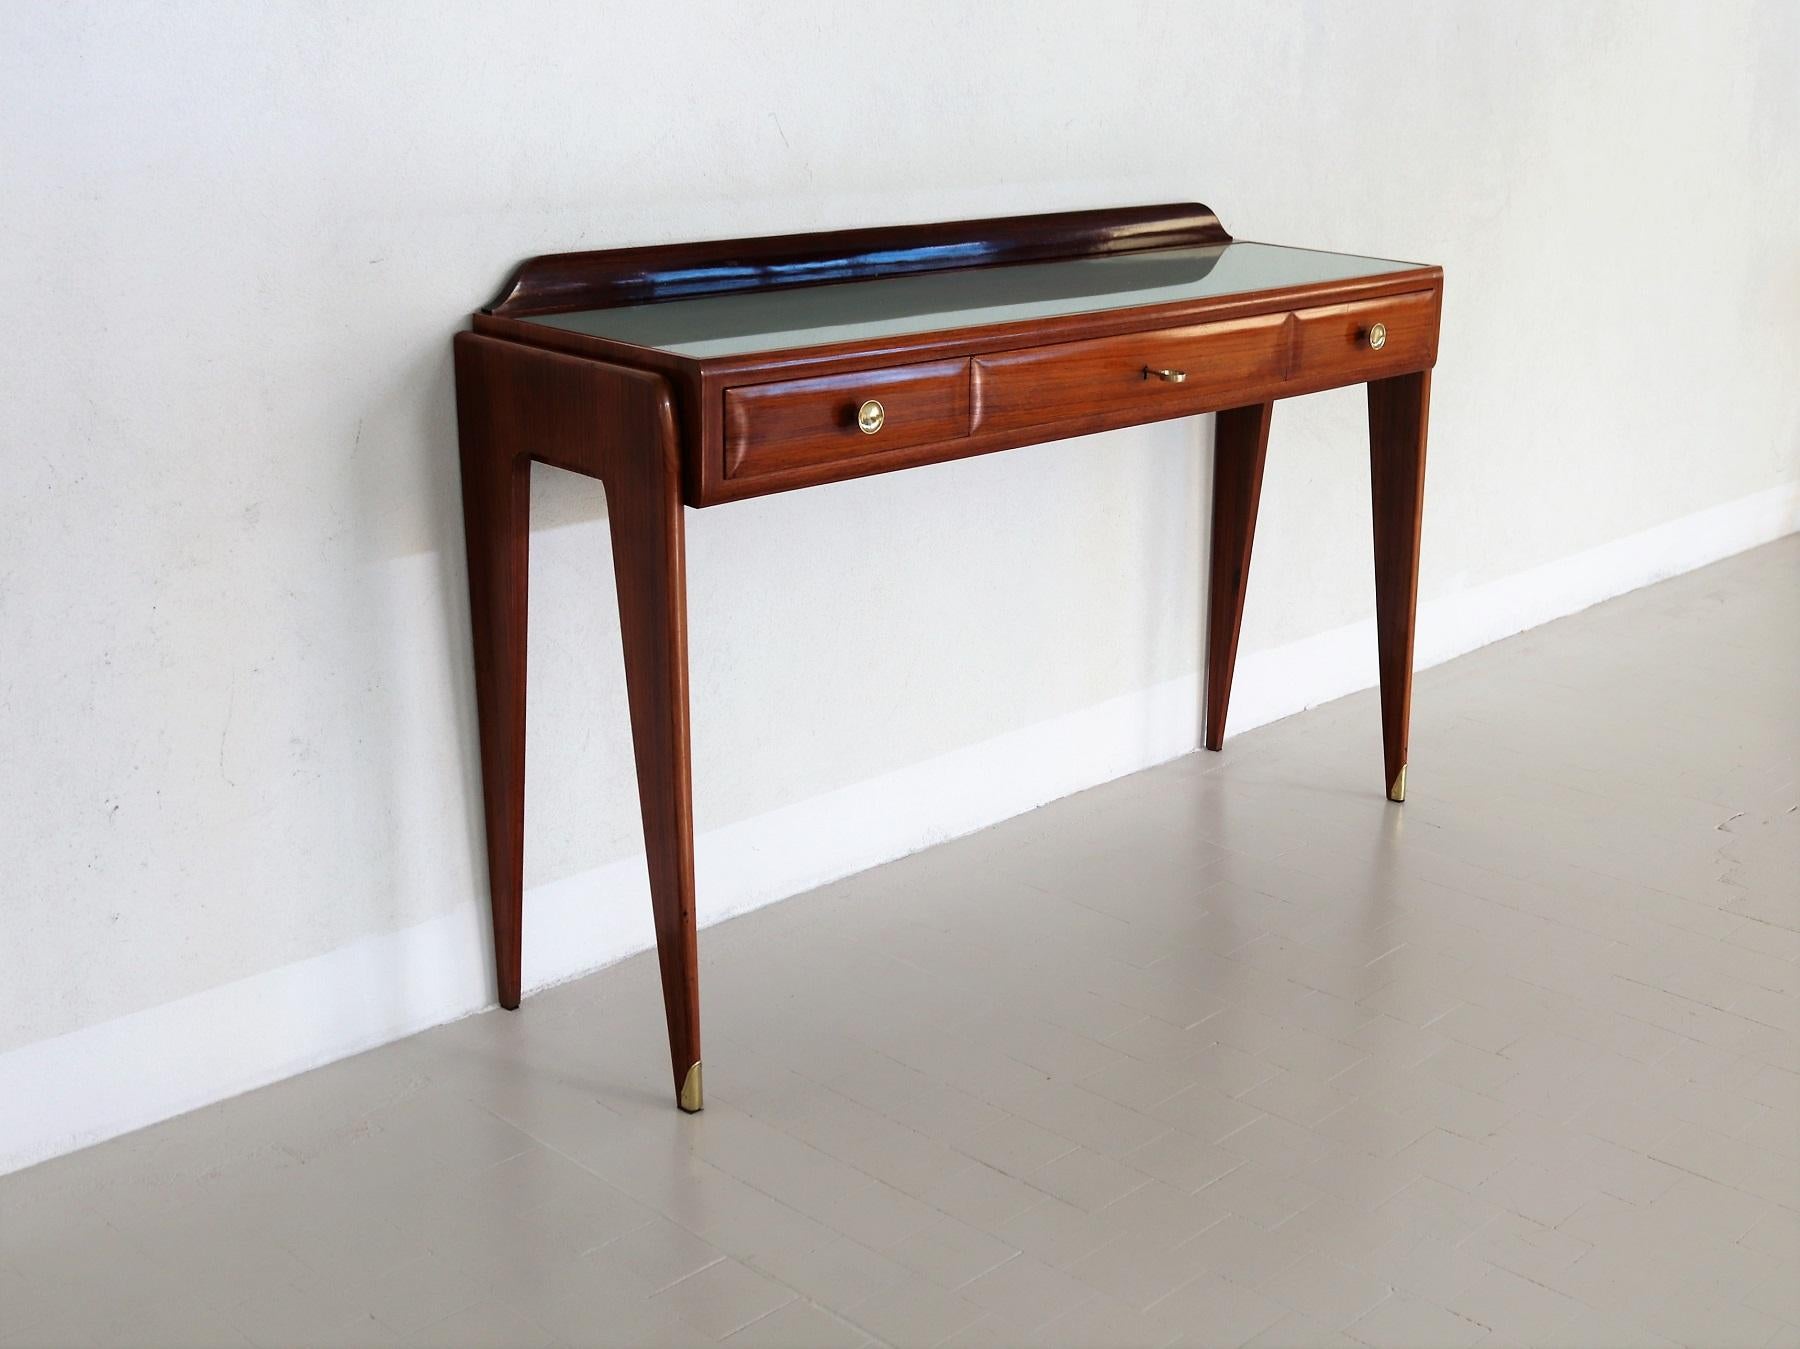 Mid-20th Century Italian Midcentury Console Table or Credenza in Mahogany by Mobili Cantu, 1950s